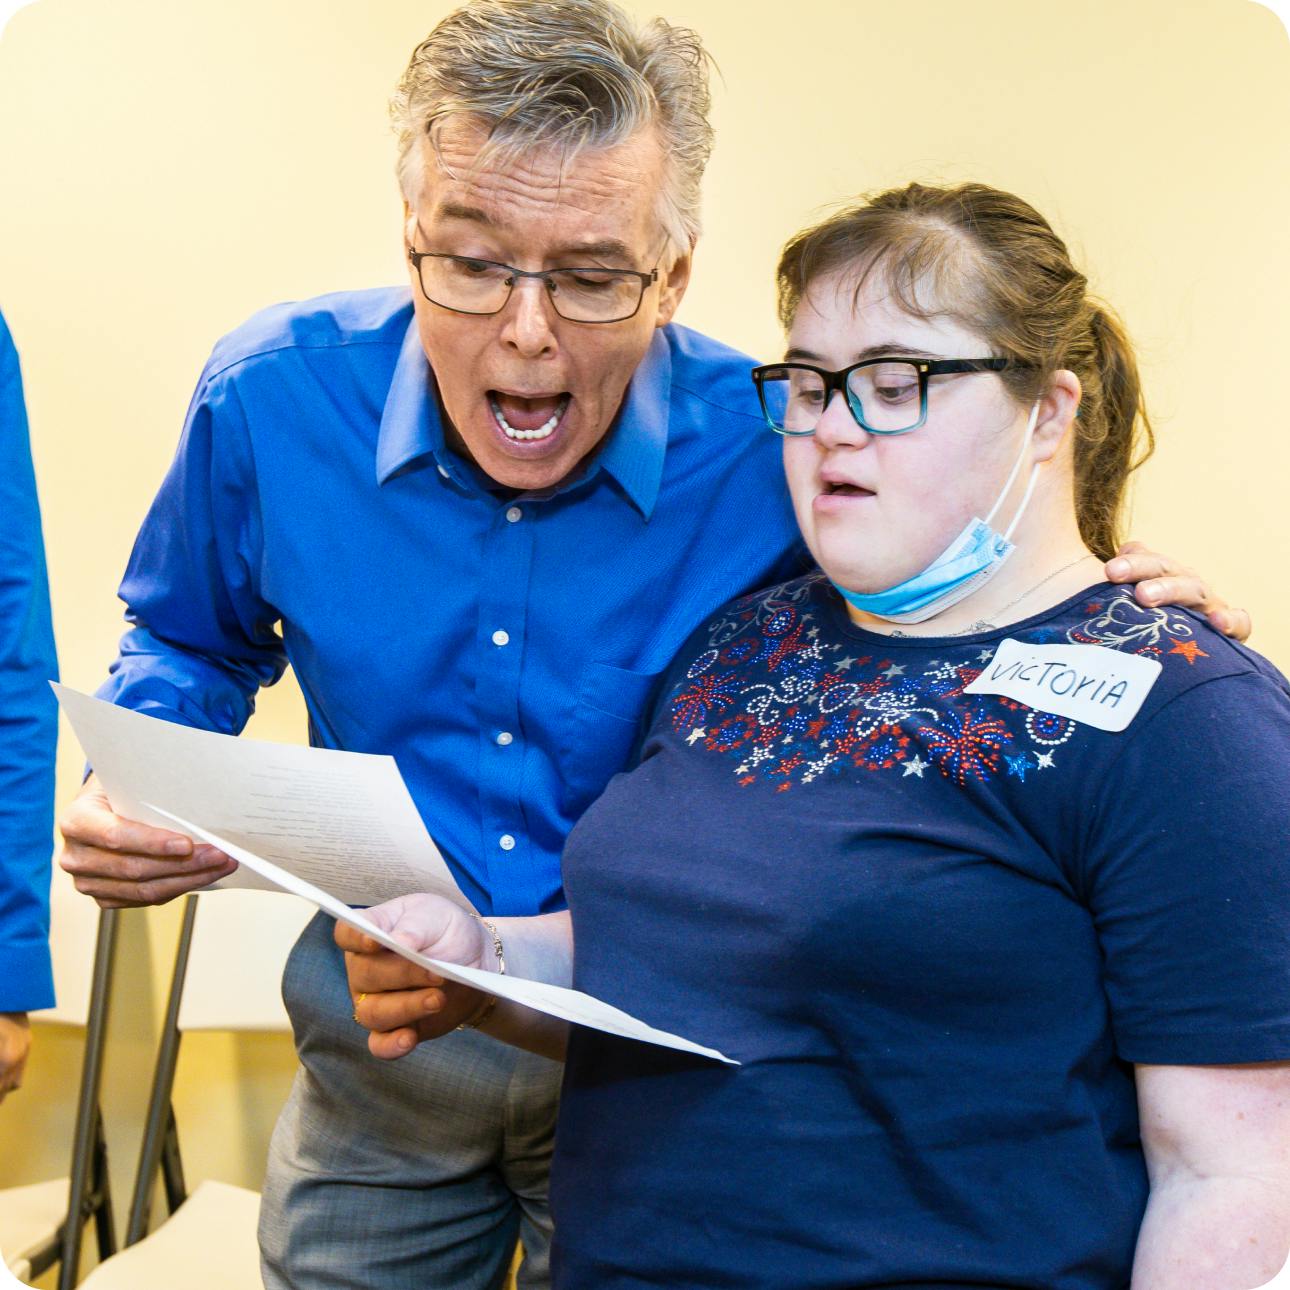 DMF Artistic Director Gerry sings with a DMF participant while reading lyrics off of a piece of paper